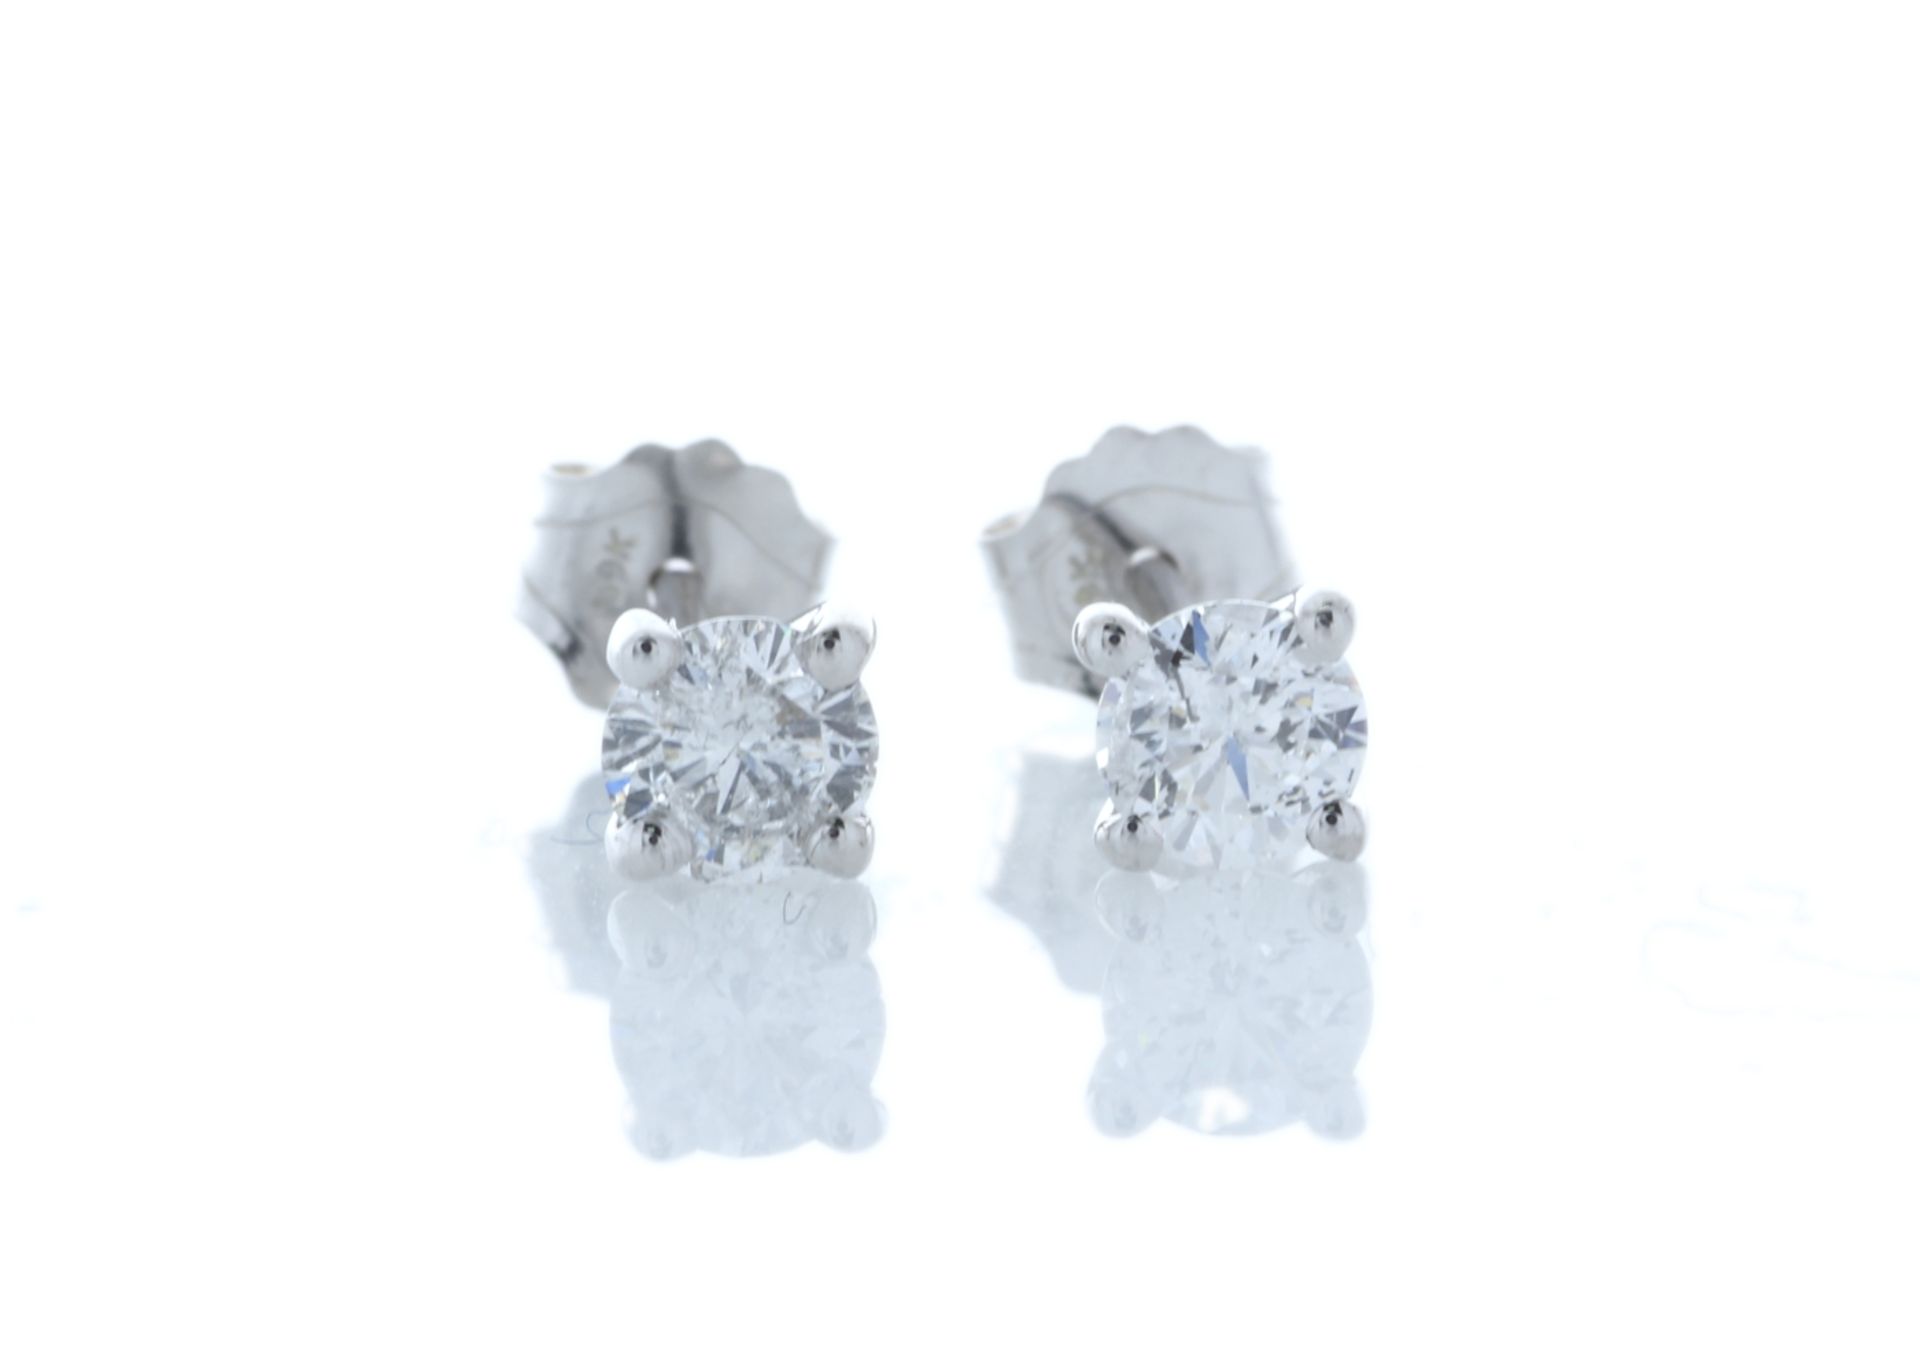 9ct White Gold Single Stone Claw Set Diamond Earring 0.42 Carats - Valued by GIE £3,450.00 - 9ct